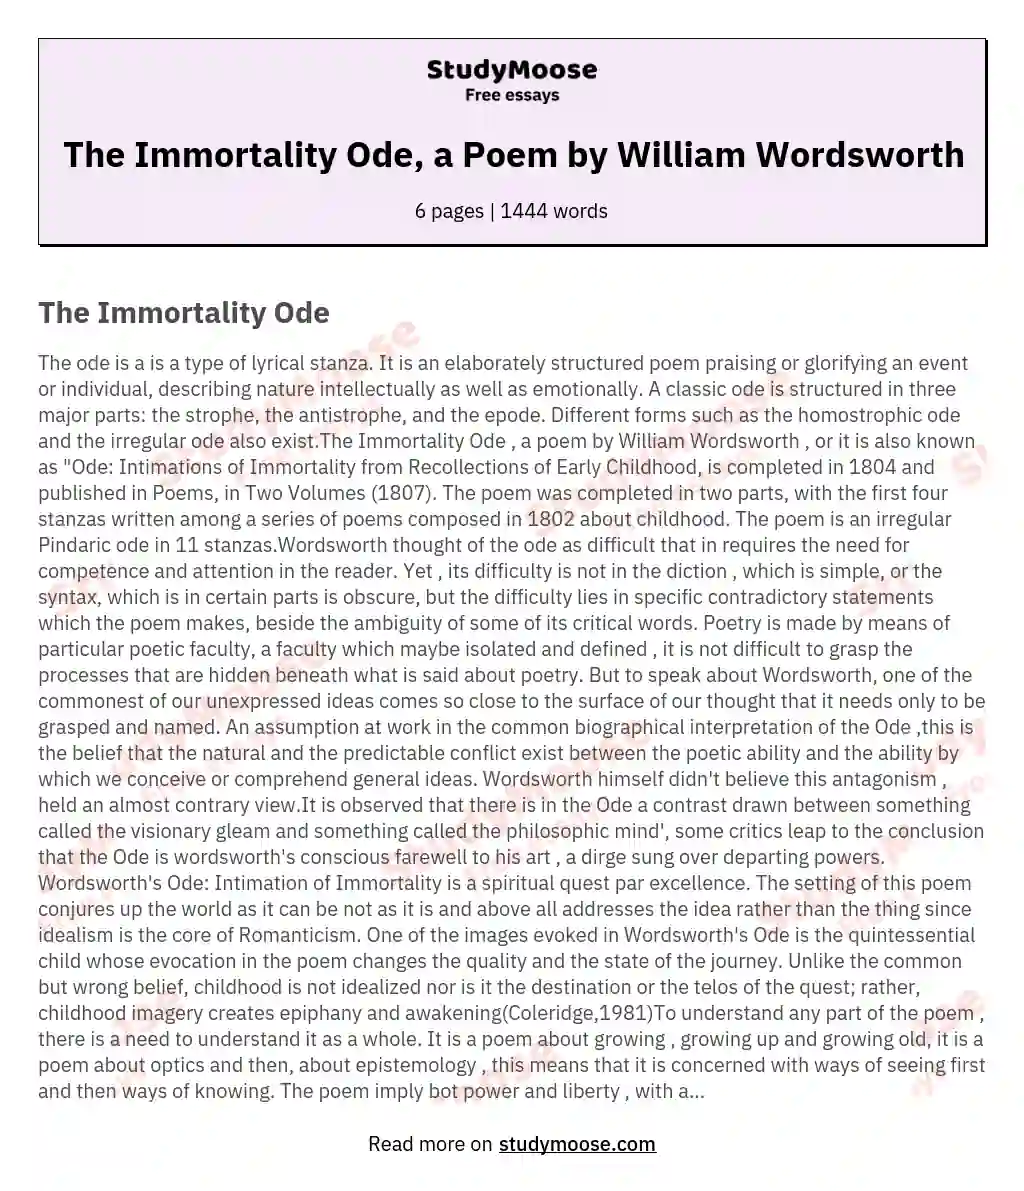 The Immortality Ode, a Poem by William Wordsworth essay